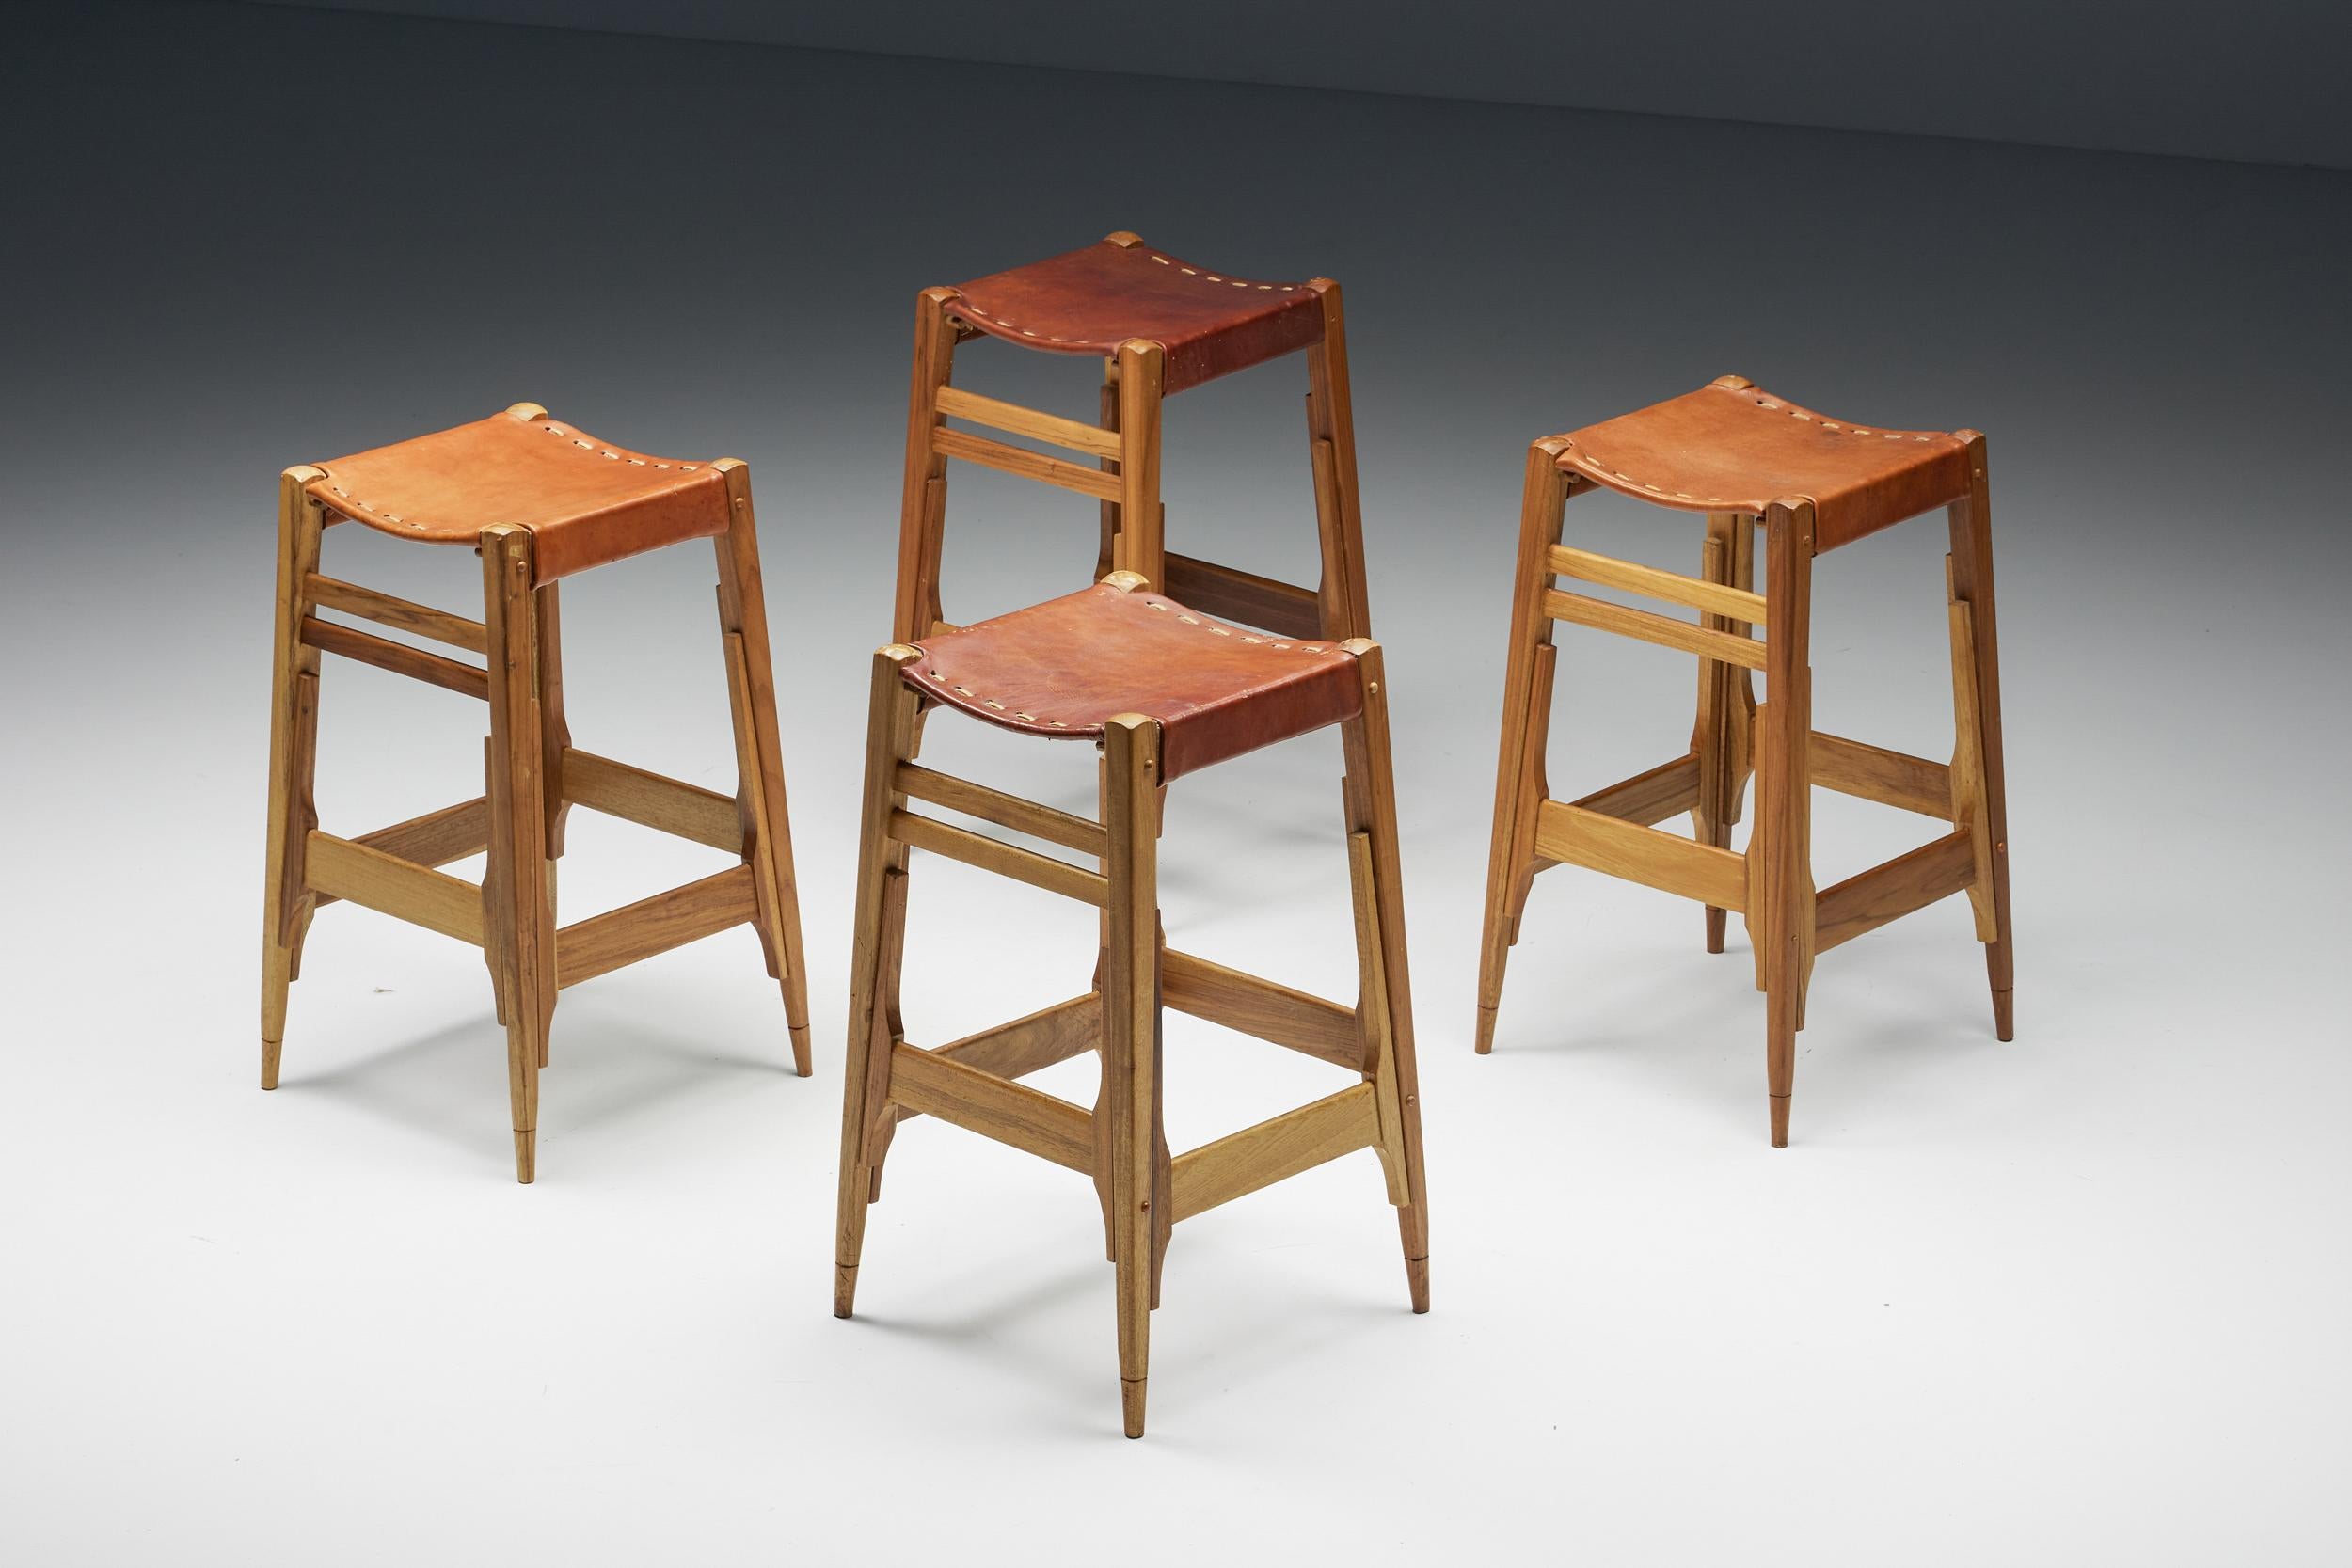 Mid-Century Modern Werner Biermann for Arte Sano Bar Stools, Hand-Tanned Leather, Colombia, 1960's